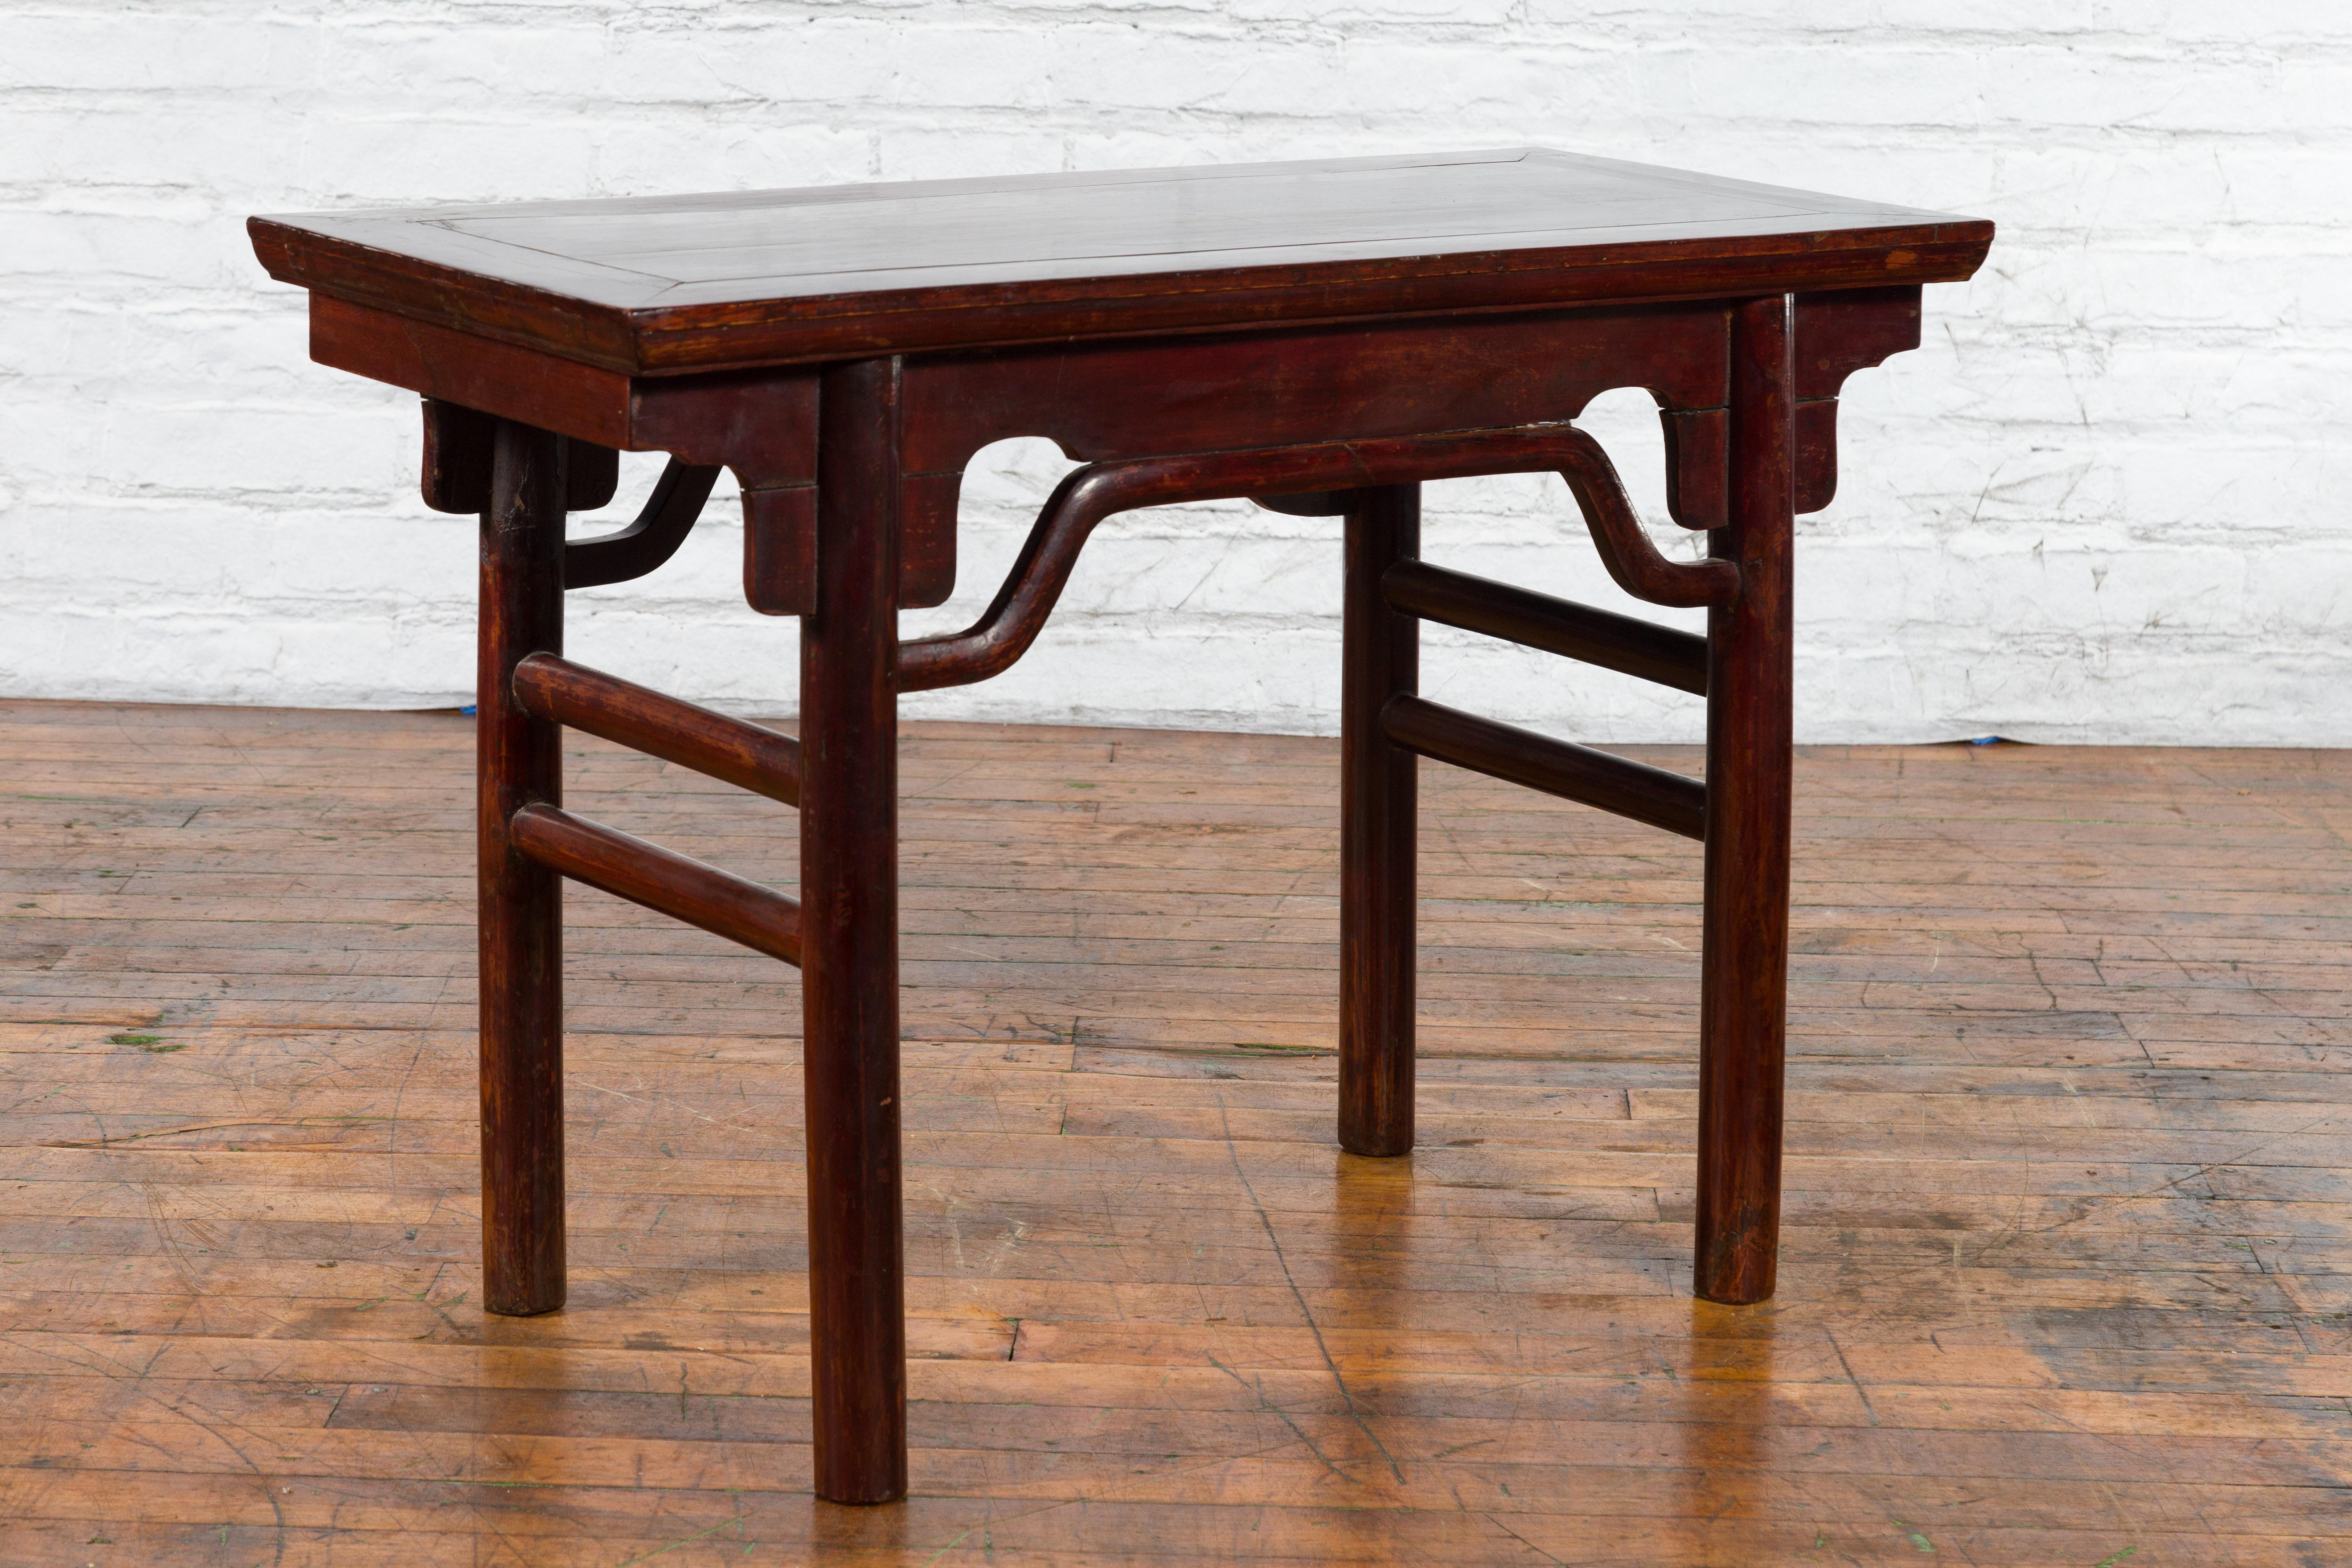 A Chinese Qing Dynasty period small altar console table from the 19th century with carved apron and side stretchers. Created in China during the Qing Dynasty, this small altar console table features a rectangular top with central board, sitting